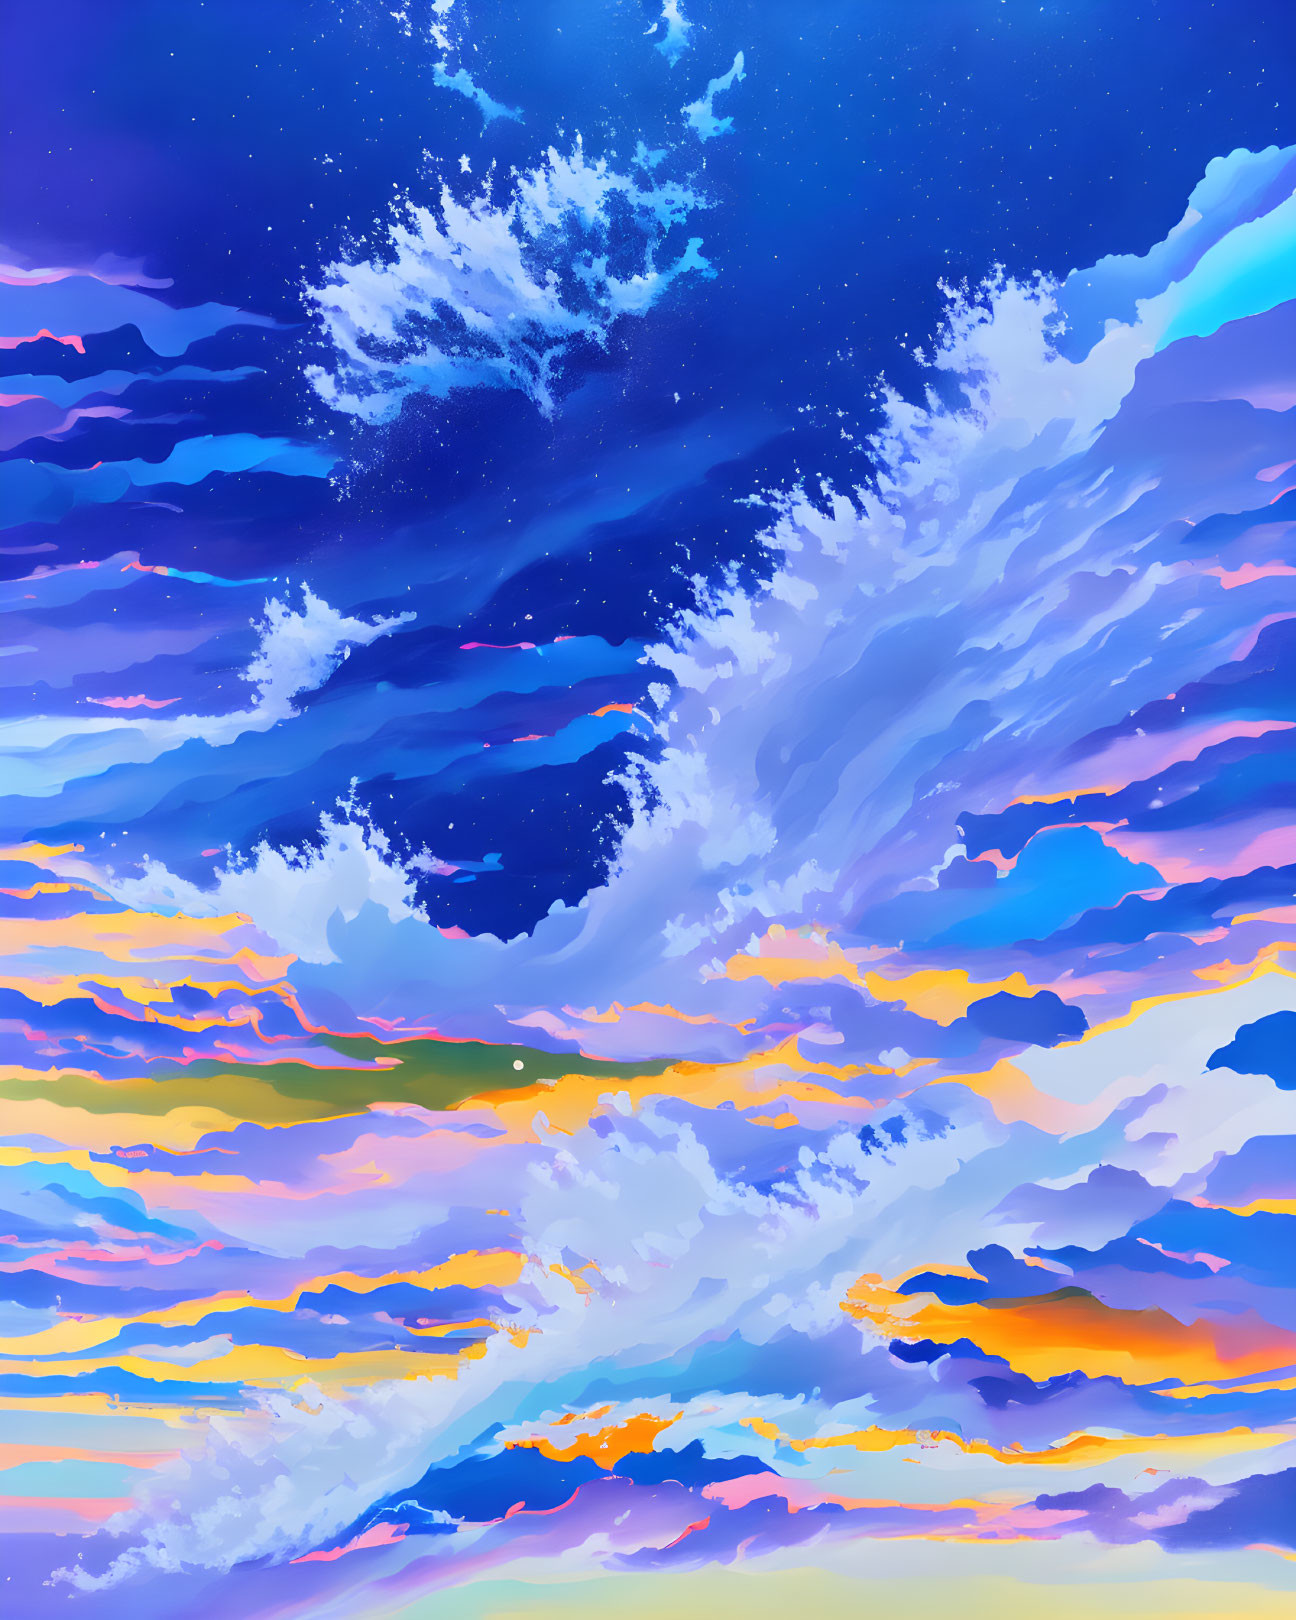 Dreamscape Symphony in Sky